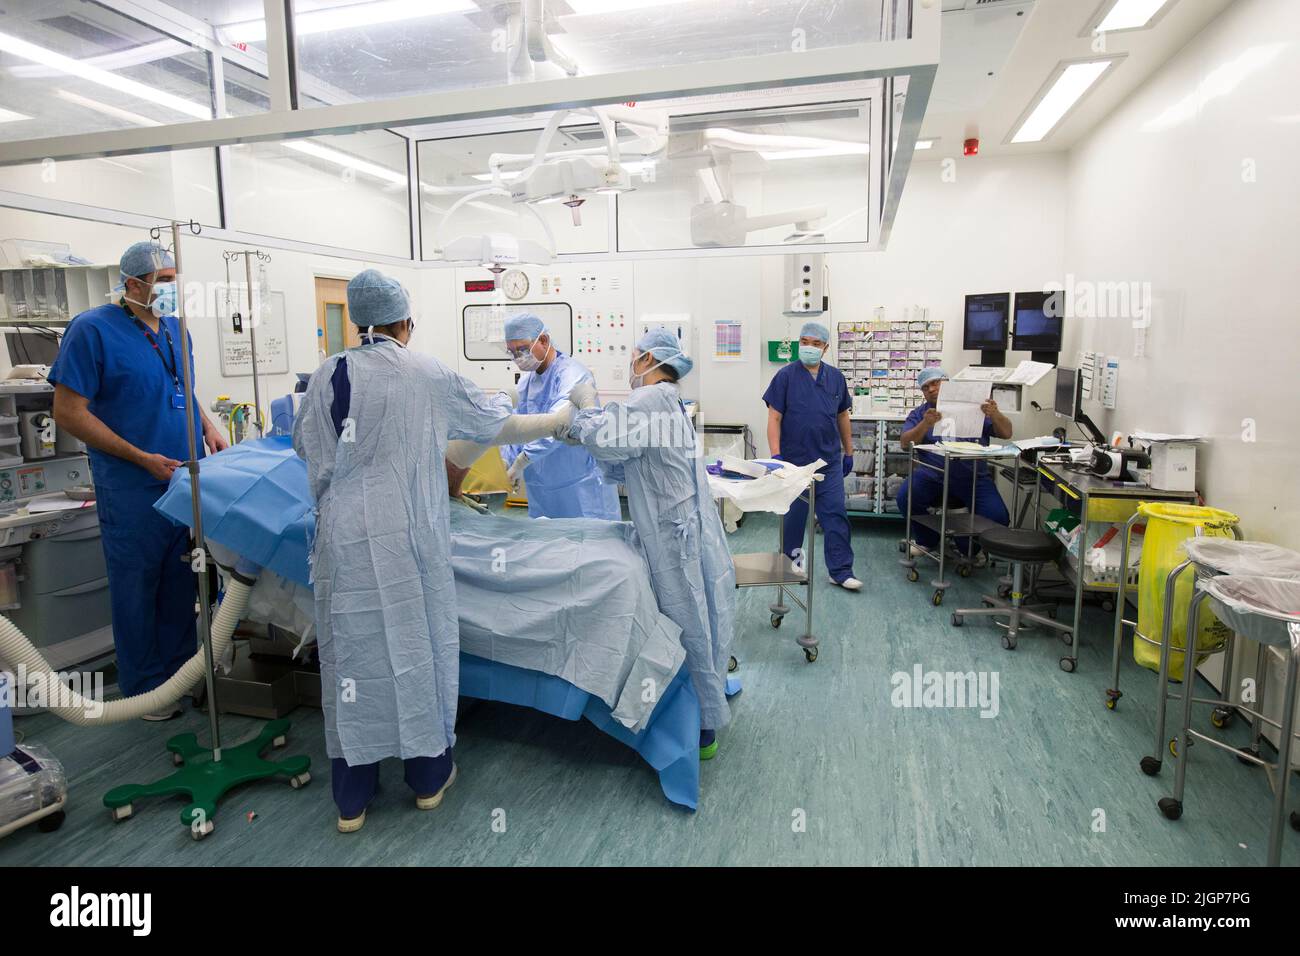 Hospital staff prepare a patient for foot surgery. The NHS is under pressure following severe cuts and staff shortages. Stock Photo